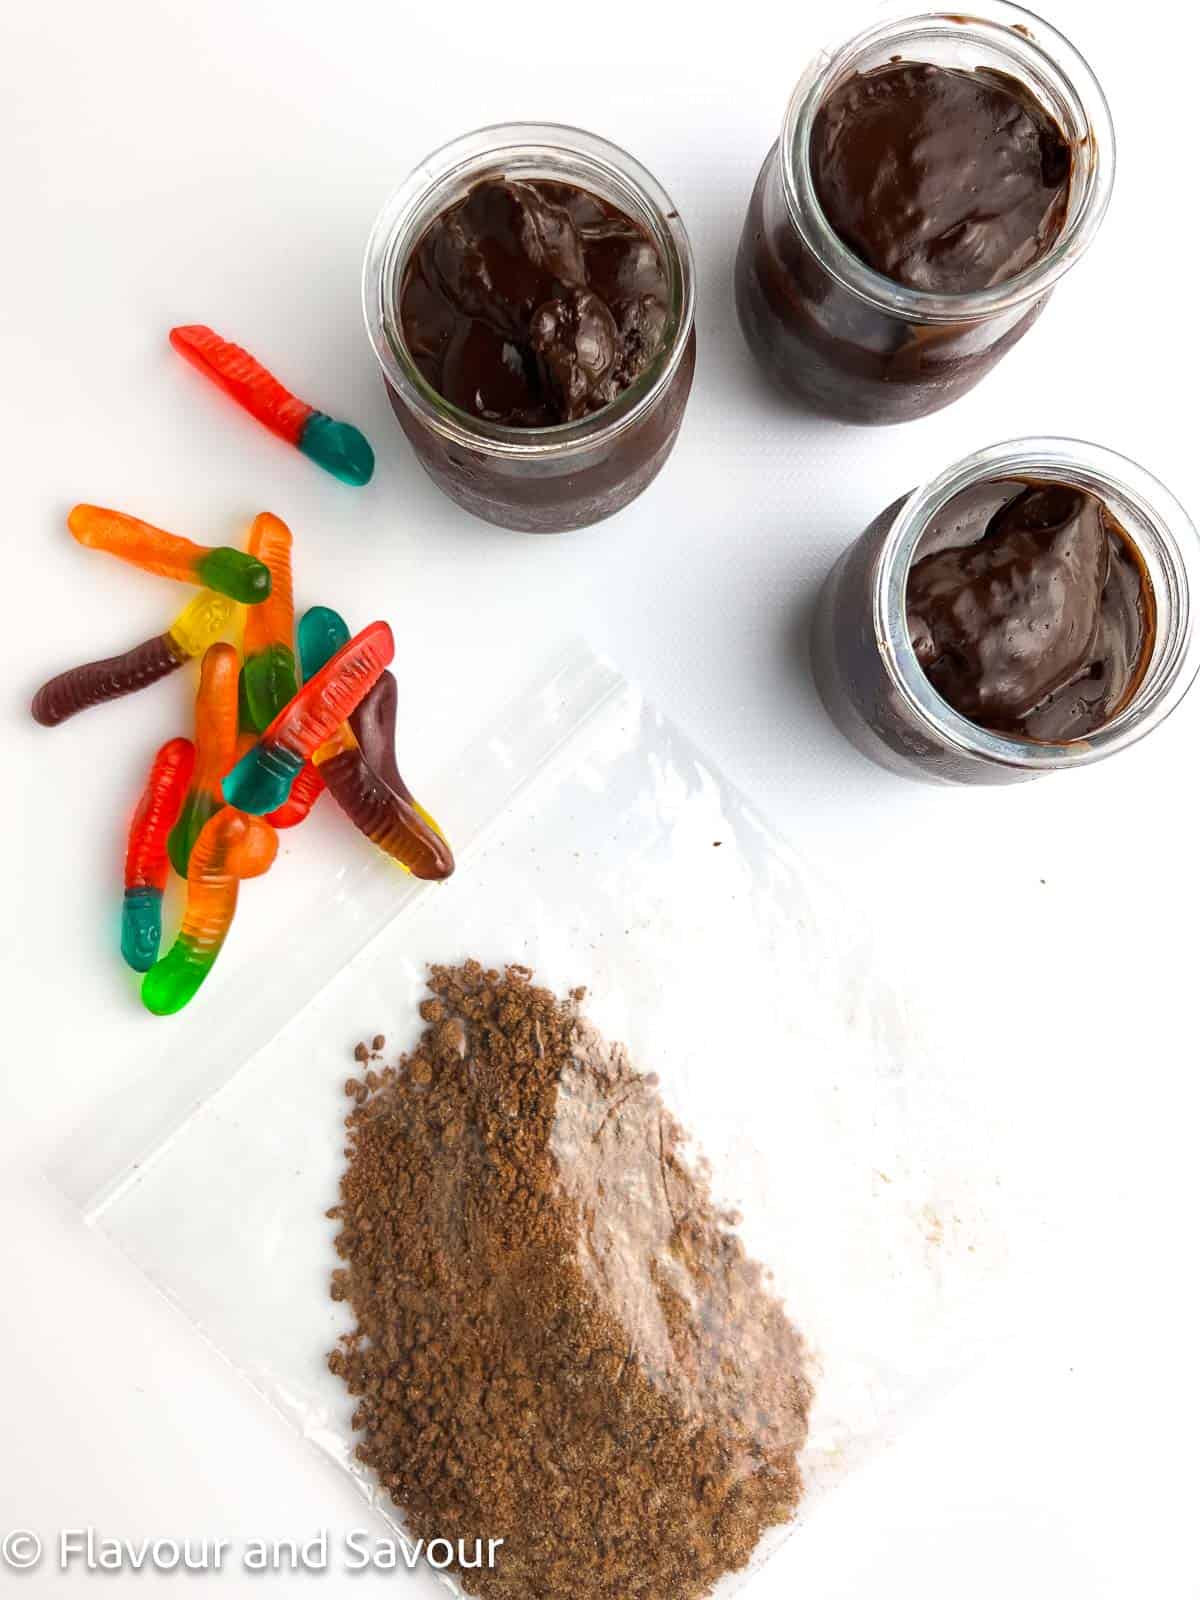 Ingredients for dirt and worms pudding cups: chocolate pudding, gummy worms, and crushed chocolate cookie crumbs.